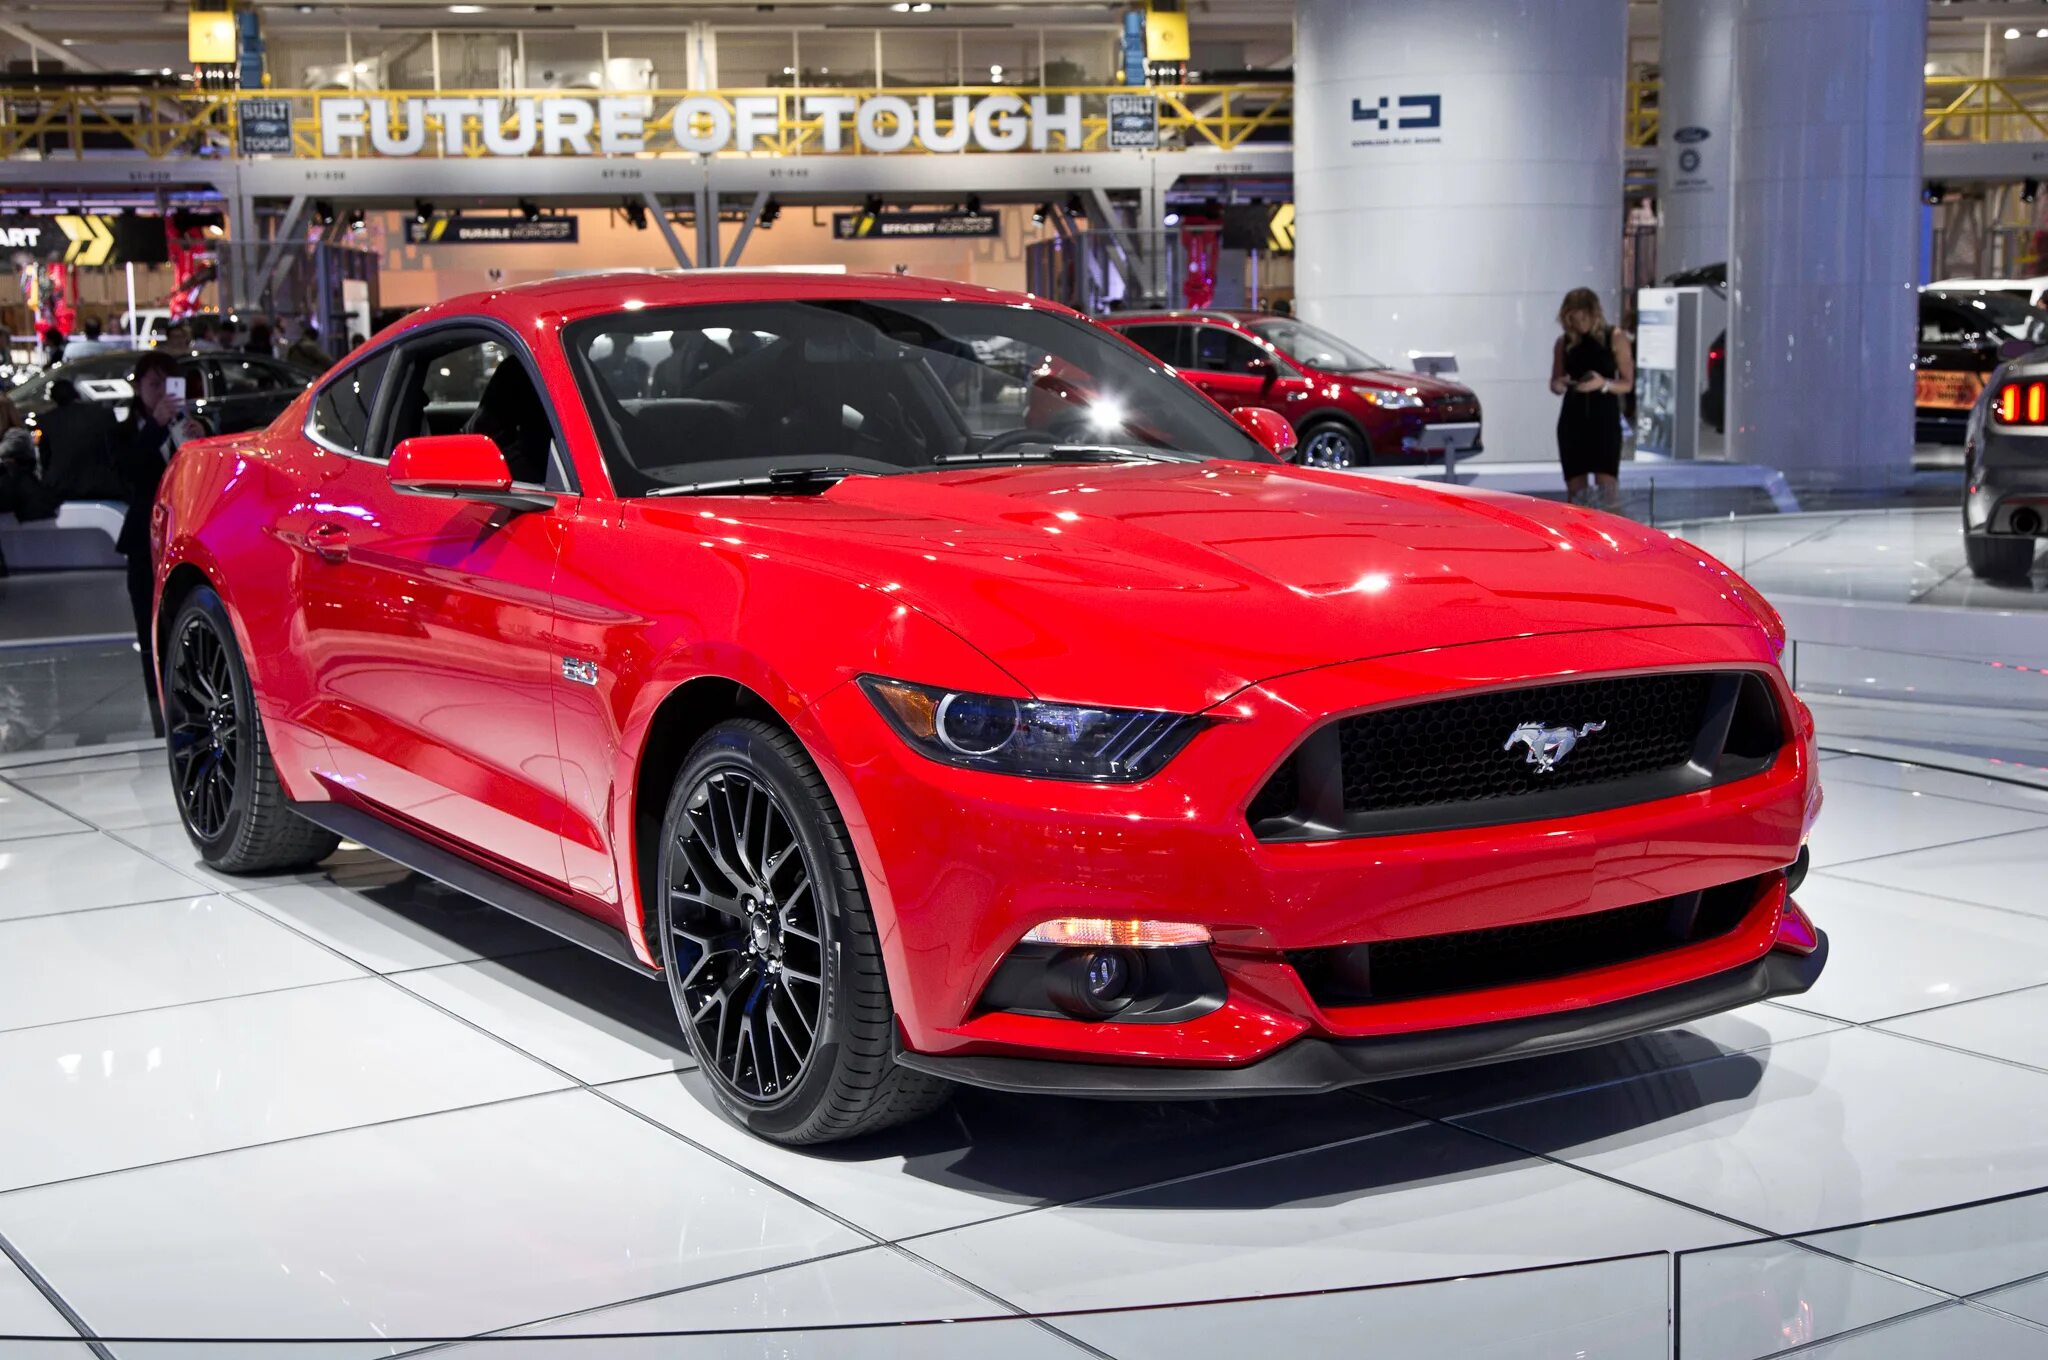 Форд Мустанг gt 2015. Ford Mustang 2015. Ford Mustang gt 2015. Форд Мустанг ГТ 2015.